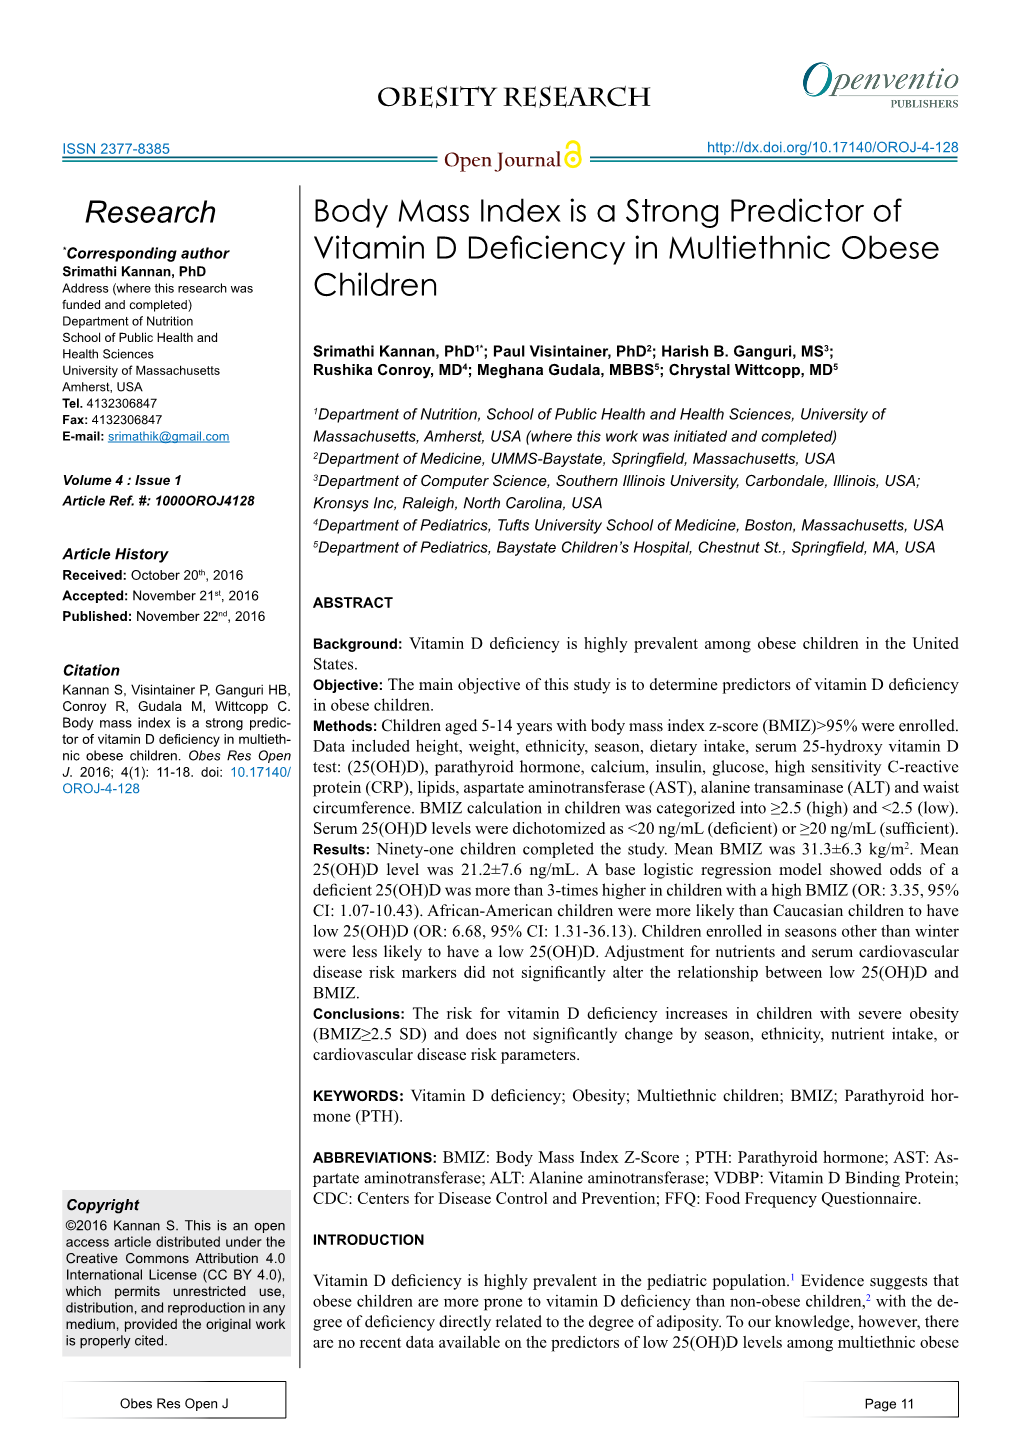 Body Mass Index Is a Strong Predictor of Vitamin D Deficiency In